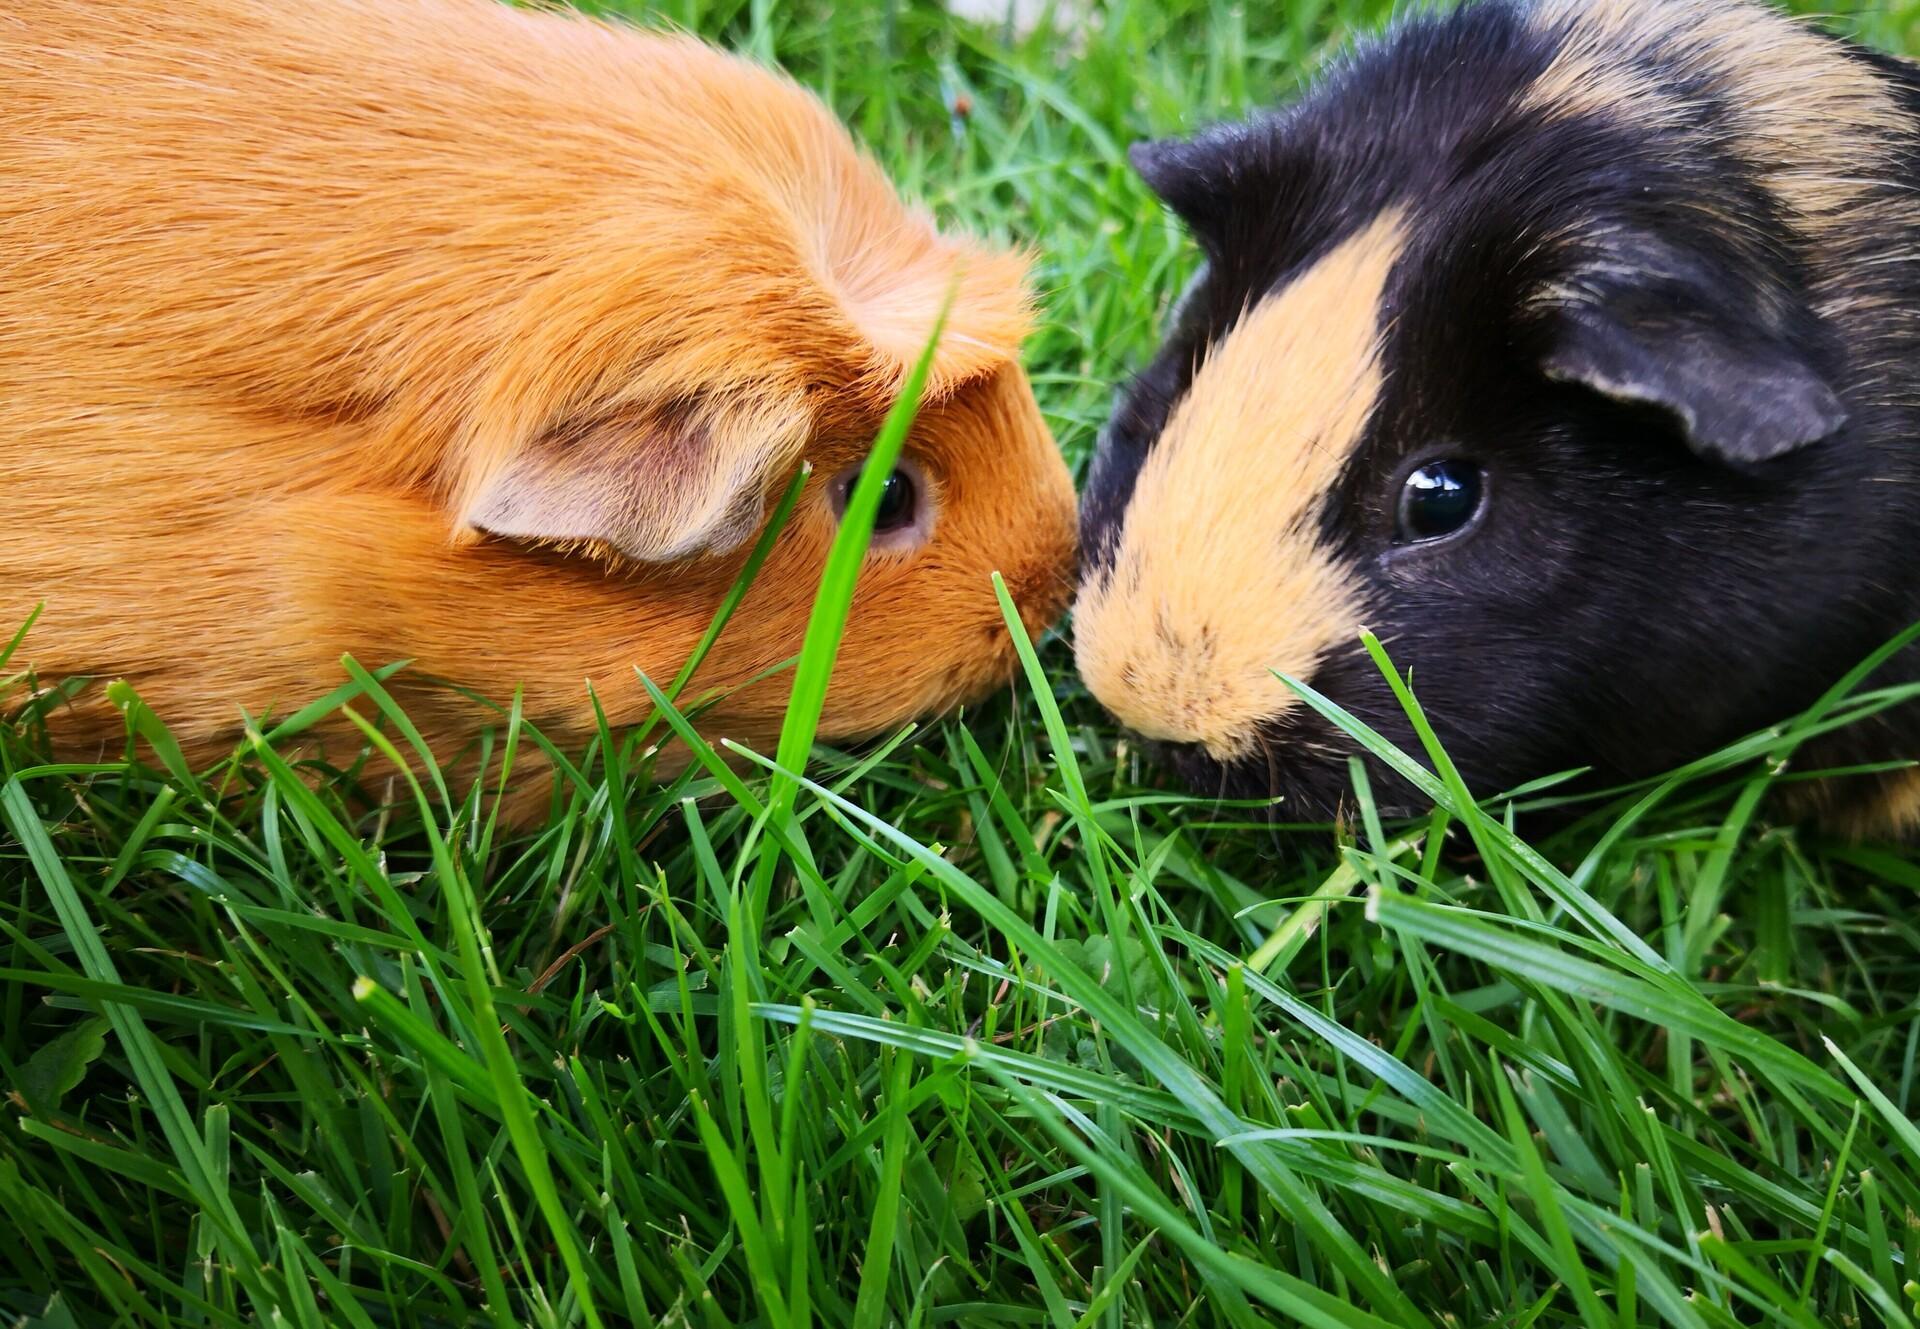 Putting Guinea Pigs Together Publications Guides Our Stories Four Paws International,What Do Horses Eat For Treats